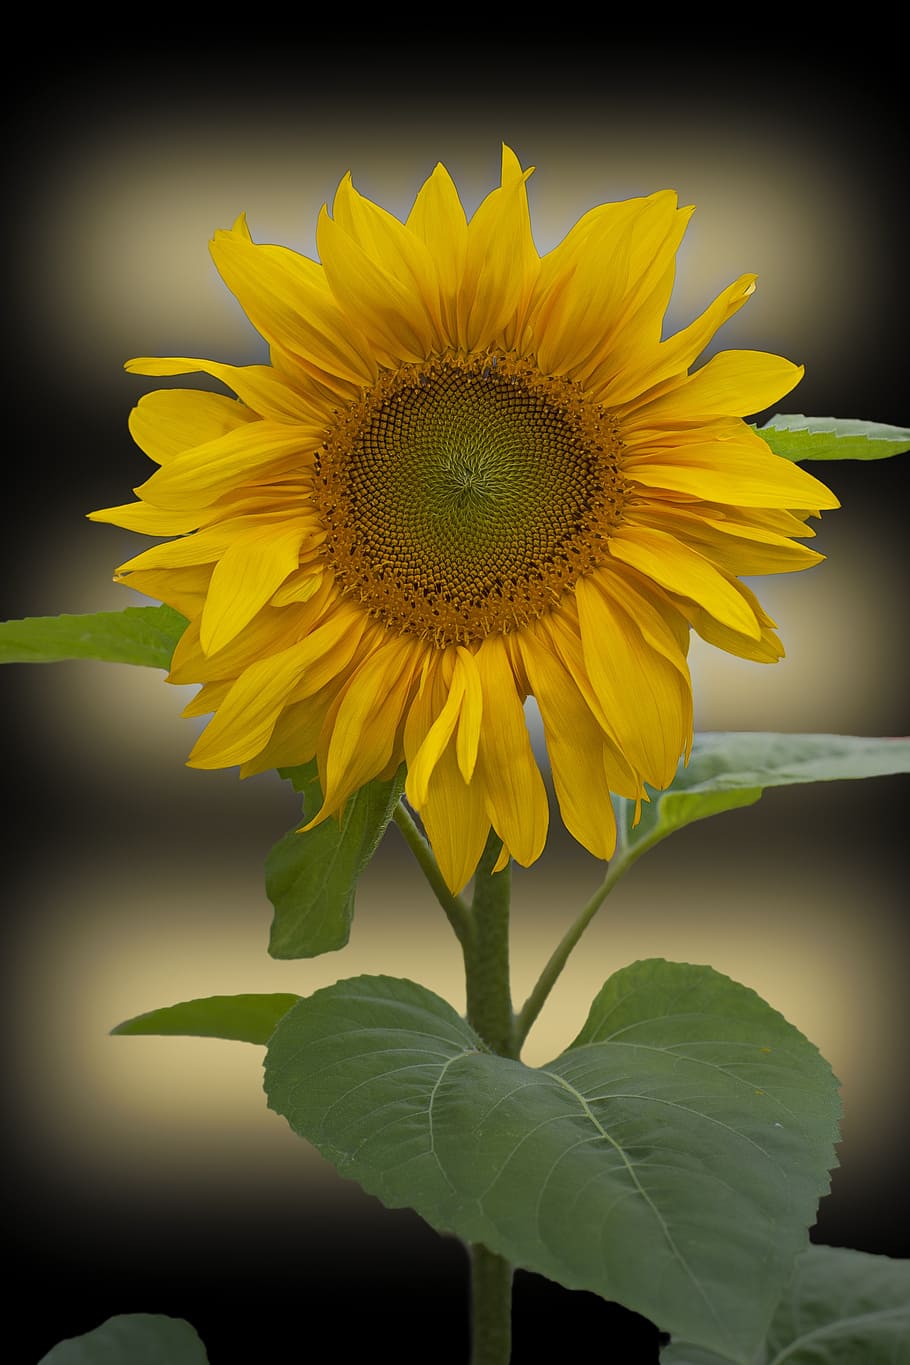 sunflower, flower, still life, sunflowers, yellow, nature, holiday, plant, summer, agriculture